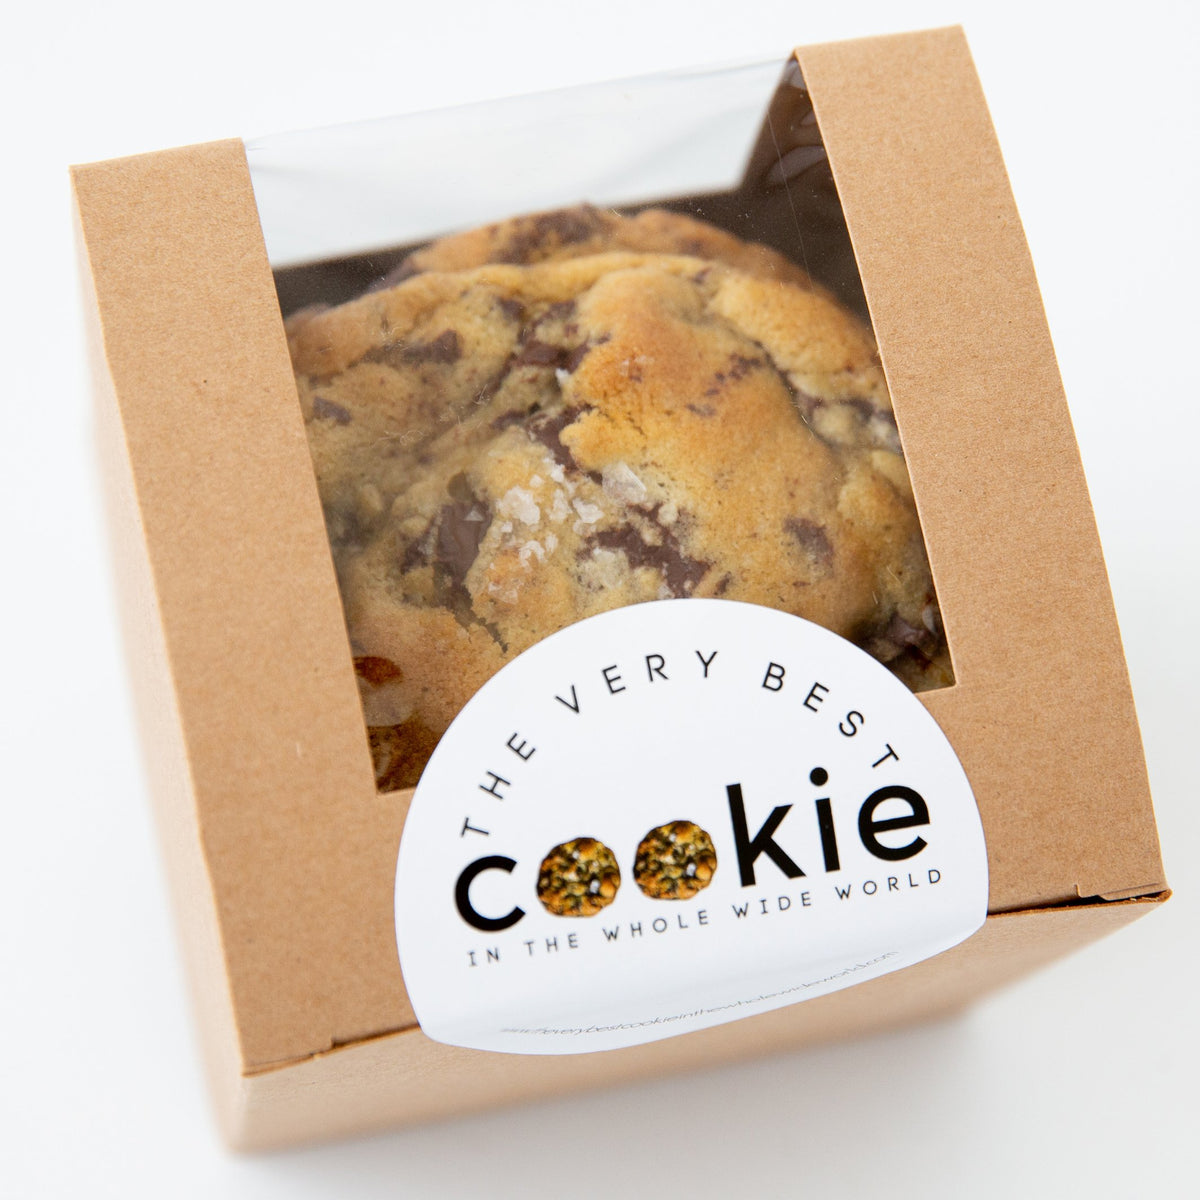 Best Products For Baking Cookies